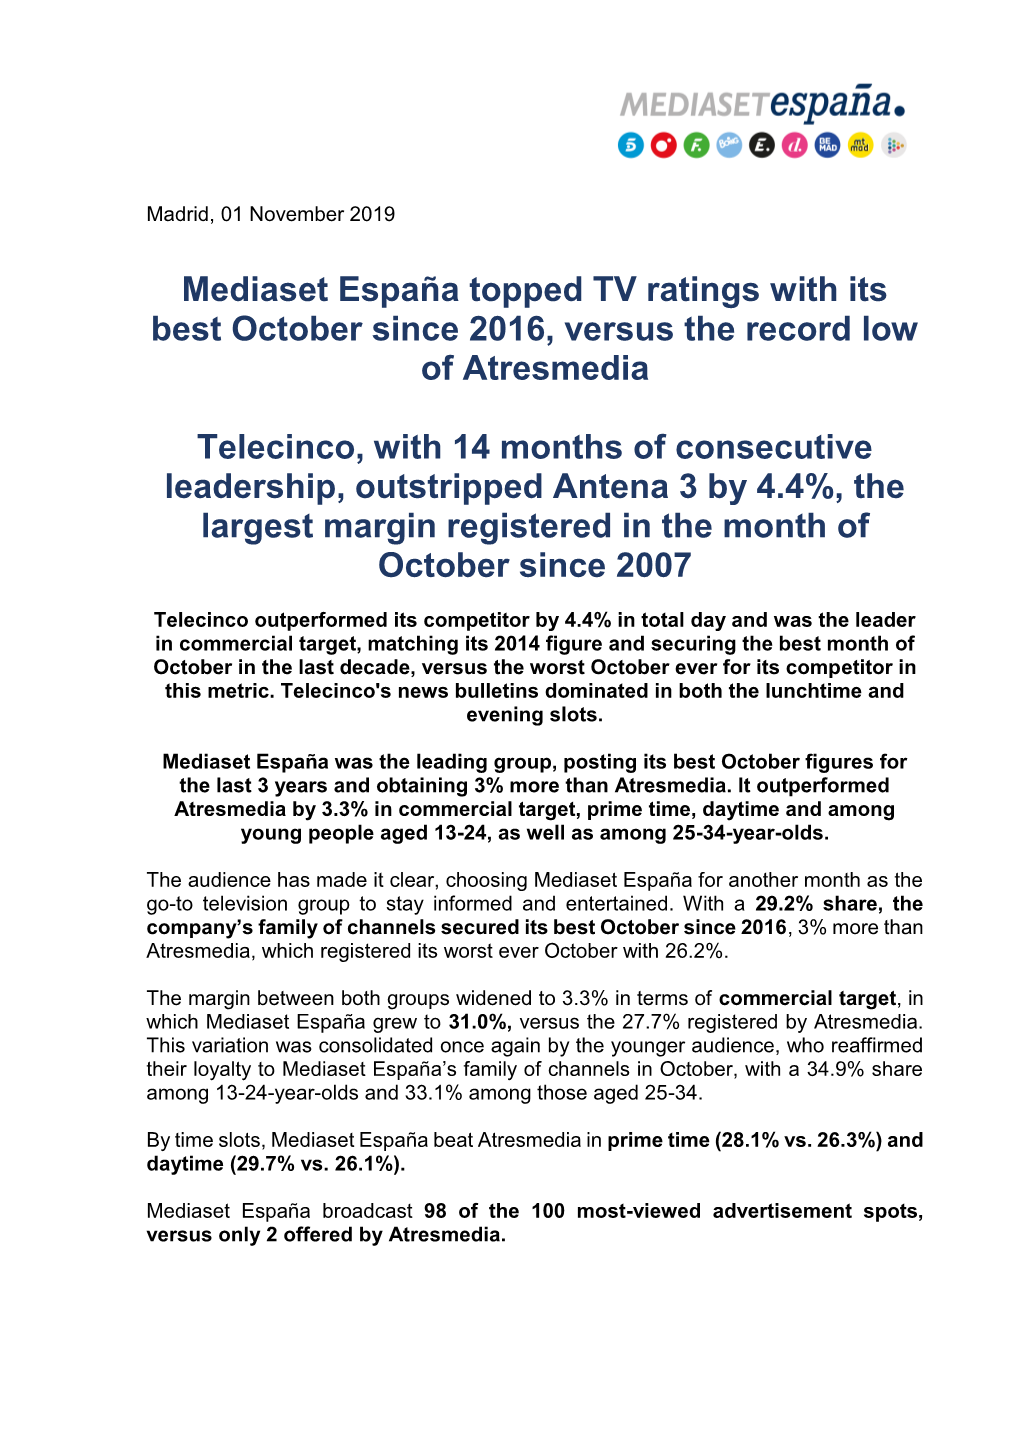 Mediaset España Topped TV Ratings with Its Best October Since 2016, Versus the Record Low of Atresmedia Telecinco, with 14 Mont